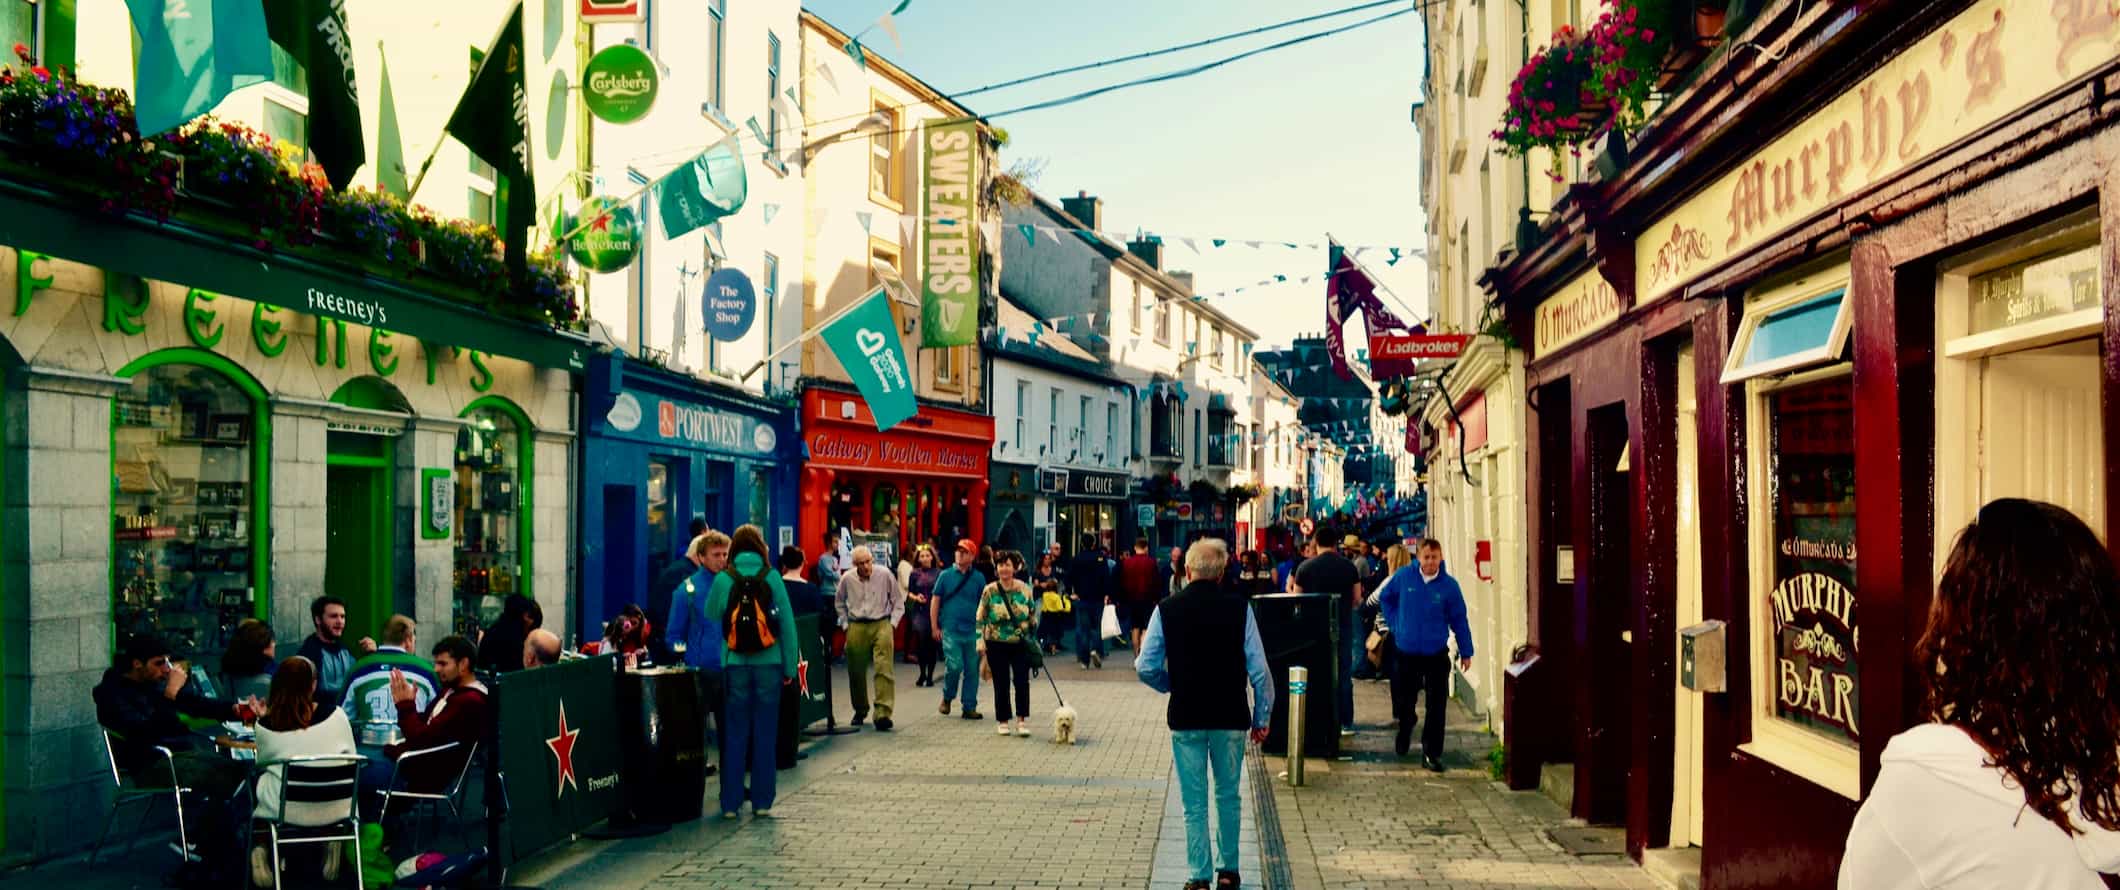 The main shopping street in charming Galway, Ireland